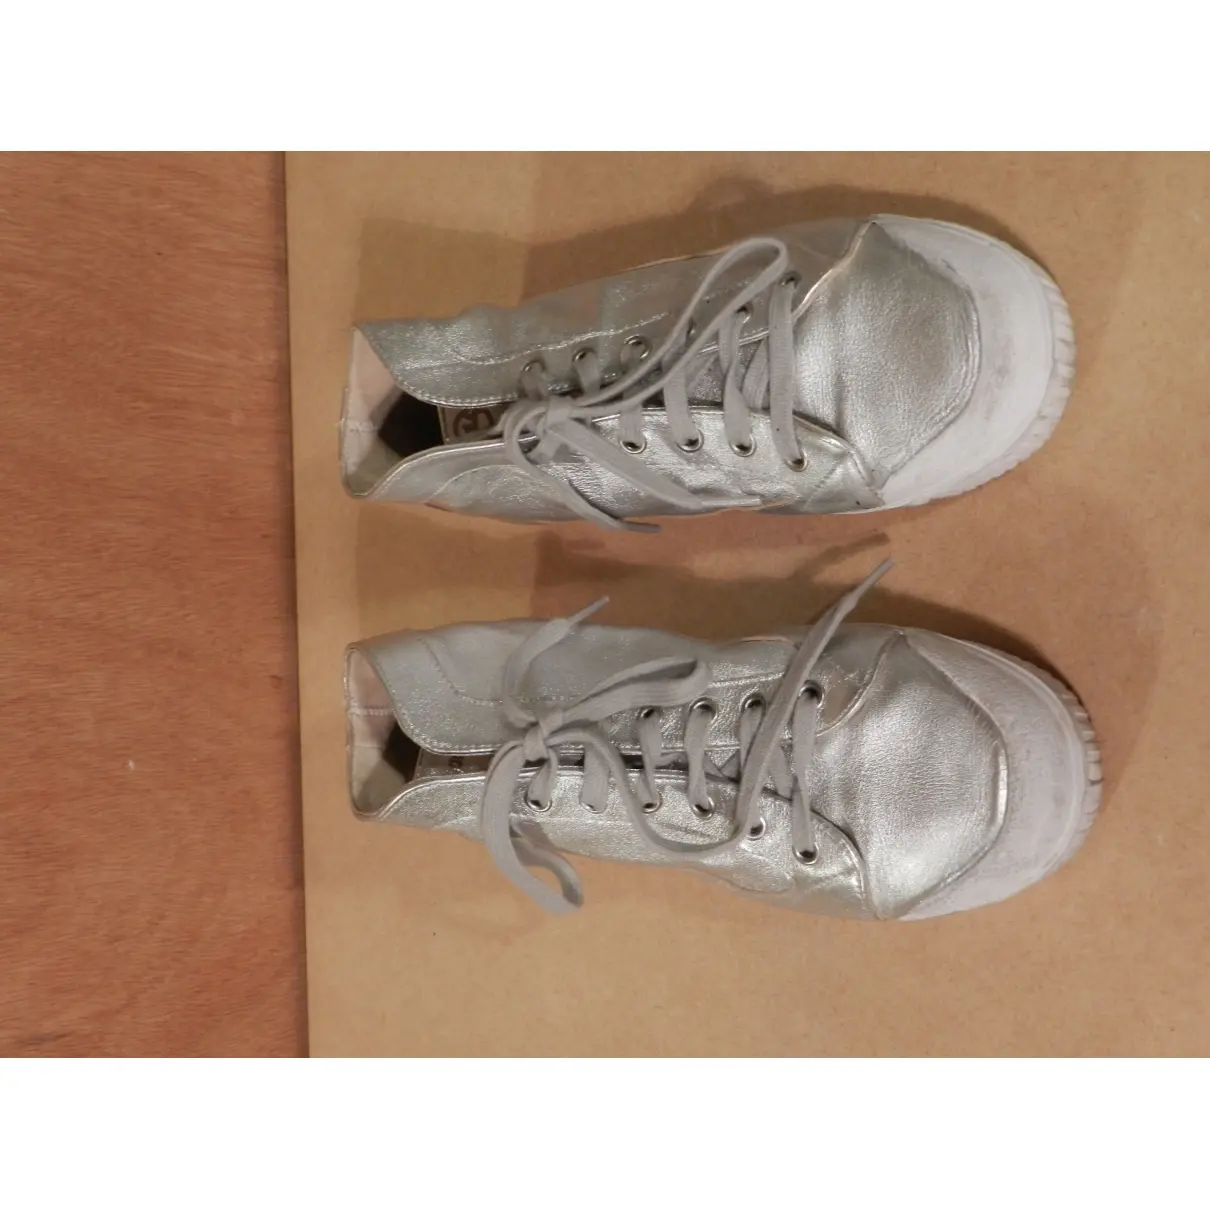 Spring Court Leather trainers for sale